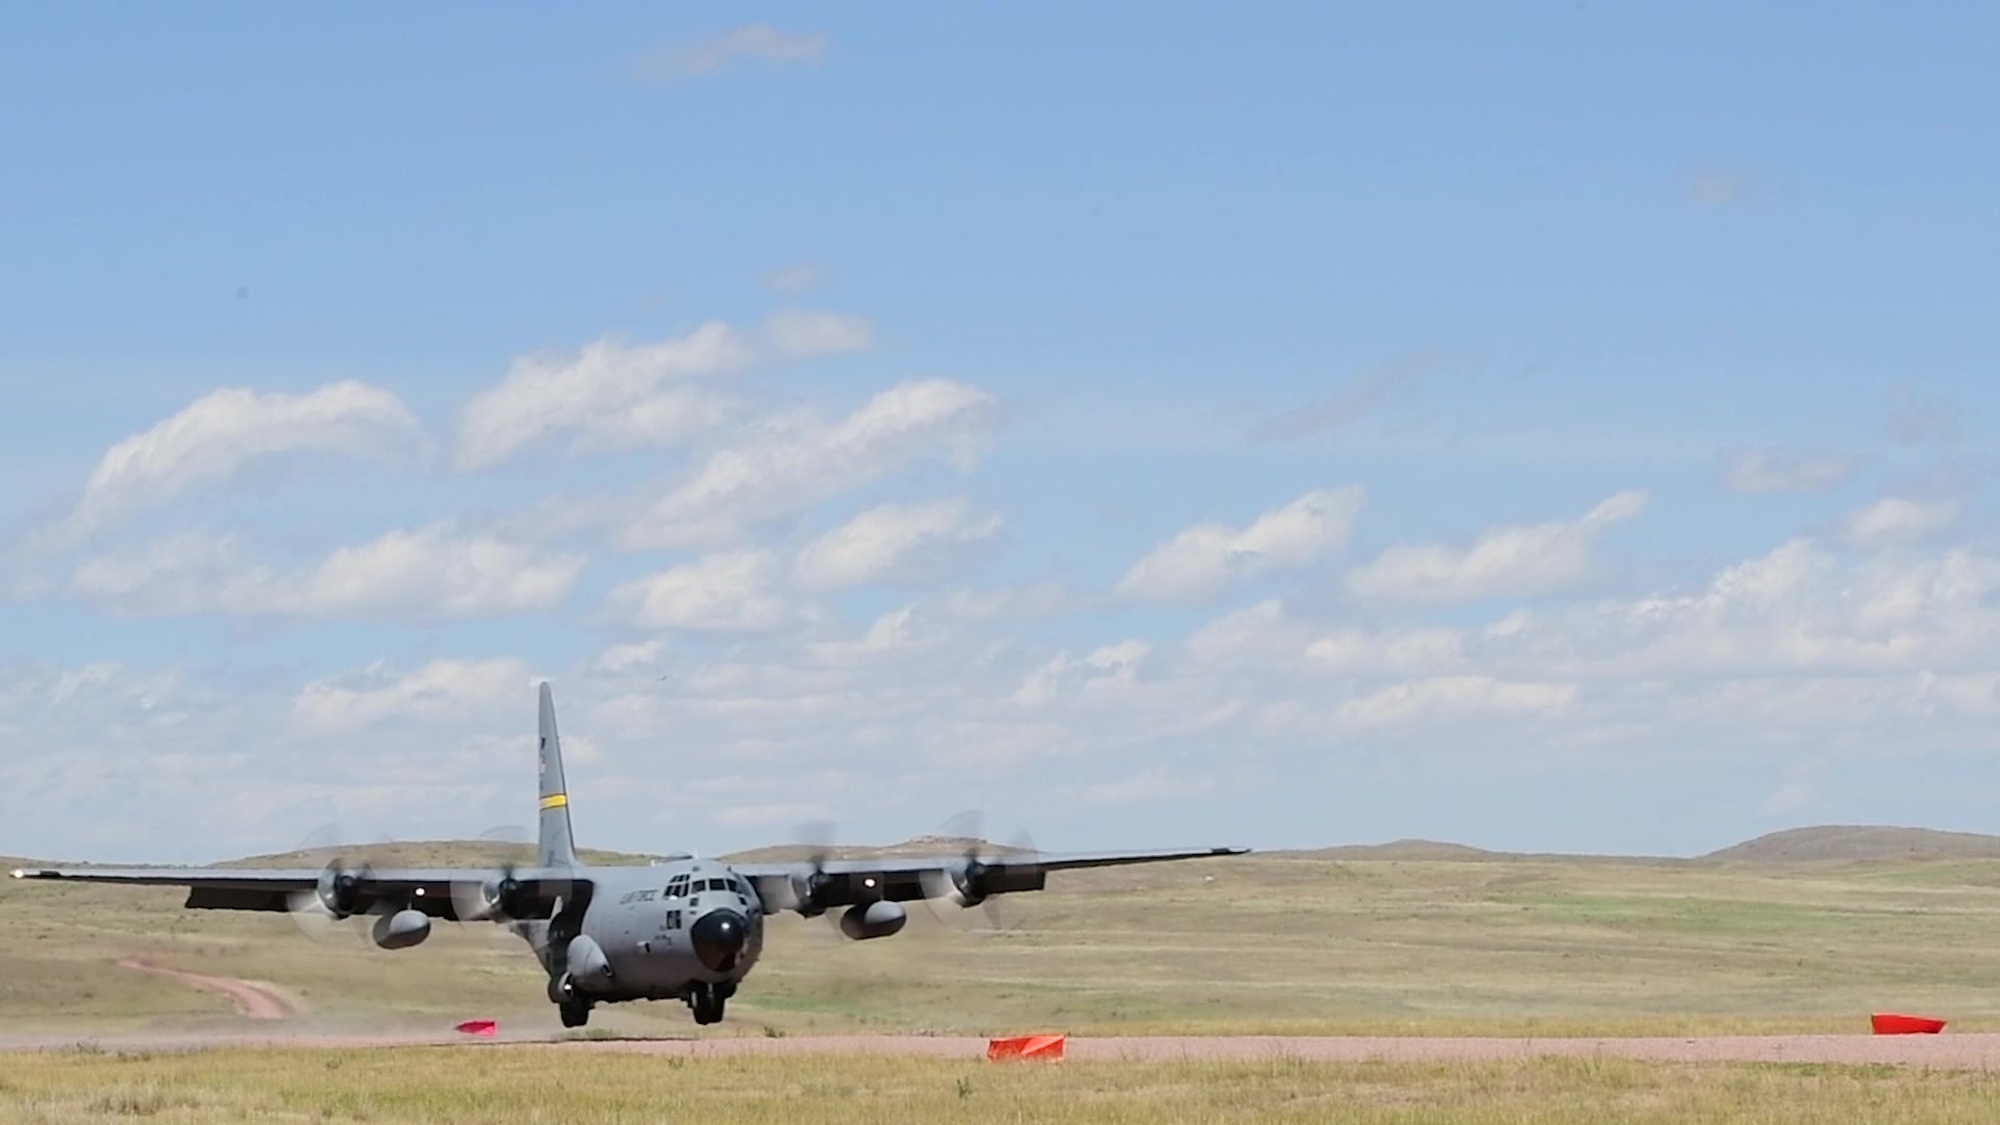 Members from the 243rd Air Traffic Control Squadron with the 153rd Airlift Wing Wyoming Air National Guard, deploy their mobile air traffic control tower equipment to guide multiple C-130 Hercules airplanes with the Wyoming Air National Guard to a tactical airstrip on July 14, 2020 at Camp Guernsey, Wyo. The 243rd ATCS is one of only ten Air National Guard Air Traffic Control Squadrons located throughout the United States. Their mission is to deploy and employ Air Traffic Control services worldwide and an important part of the Guard air traffic control mission includes establishing bases in locations without existing air traffic control facilities. (U.S. Air National Guard video by Tech. Sgt. Jon Alderman)